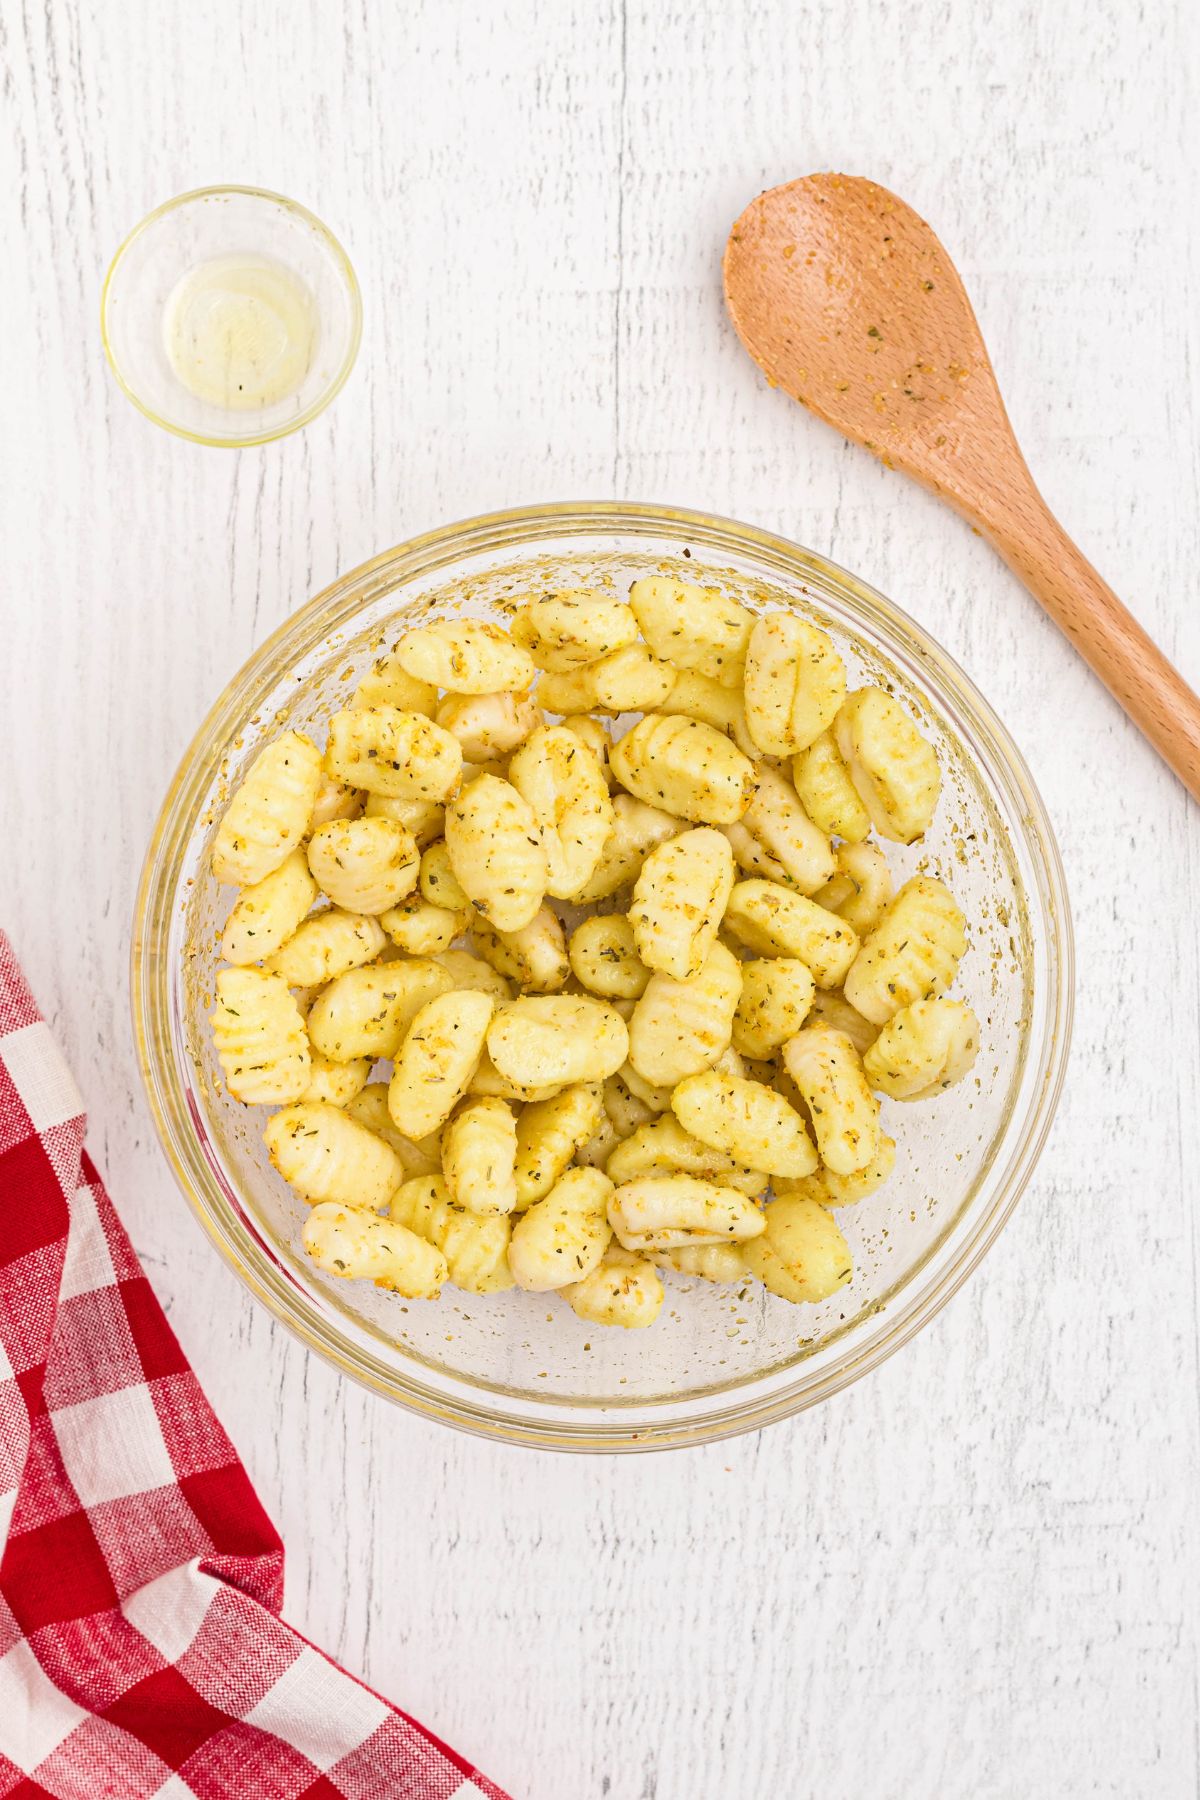 Golden gnocci tossed in olive oil and seasonings in a clear glass bowl.